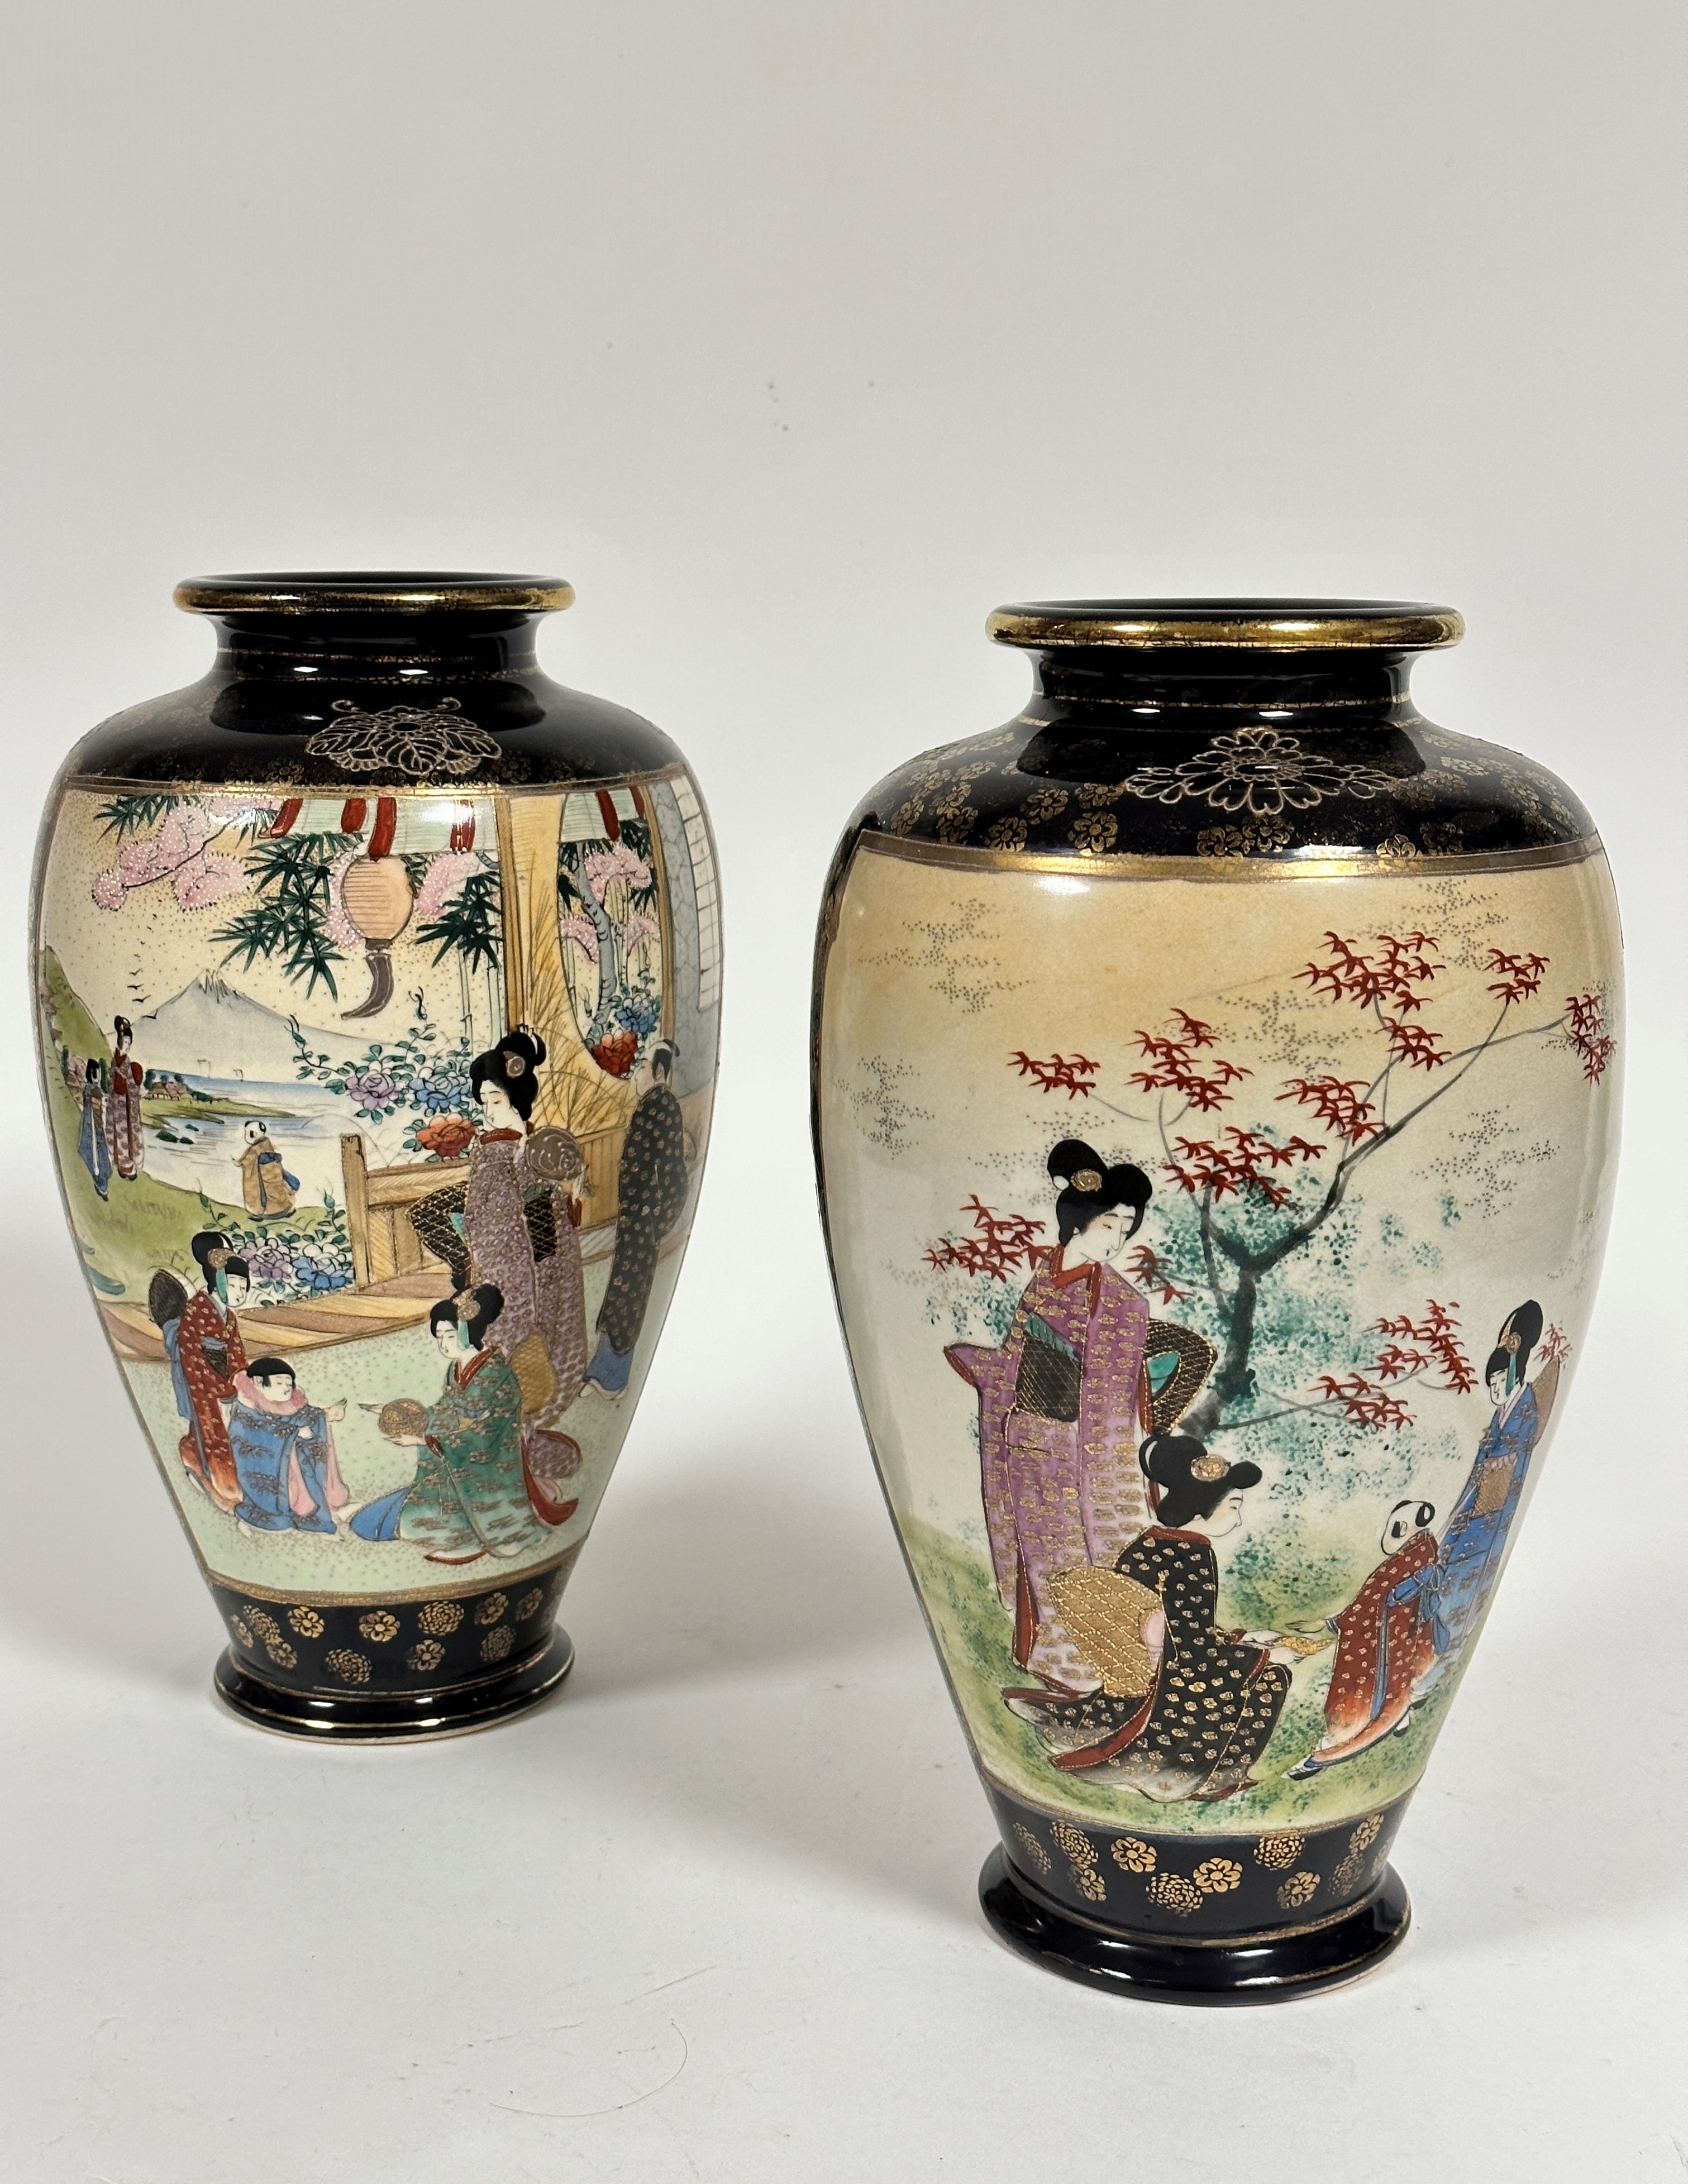 A pair of Japanese Satsuma ovoid tapered vases decorated with scenes in a garden of women playing